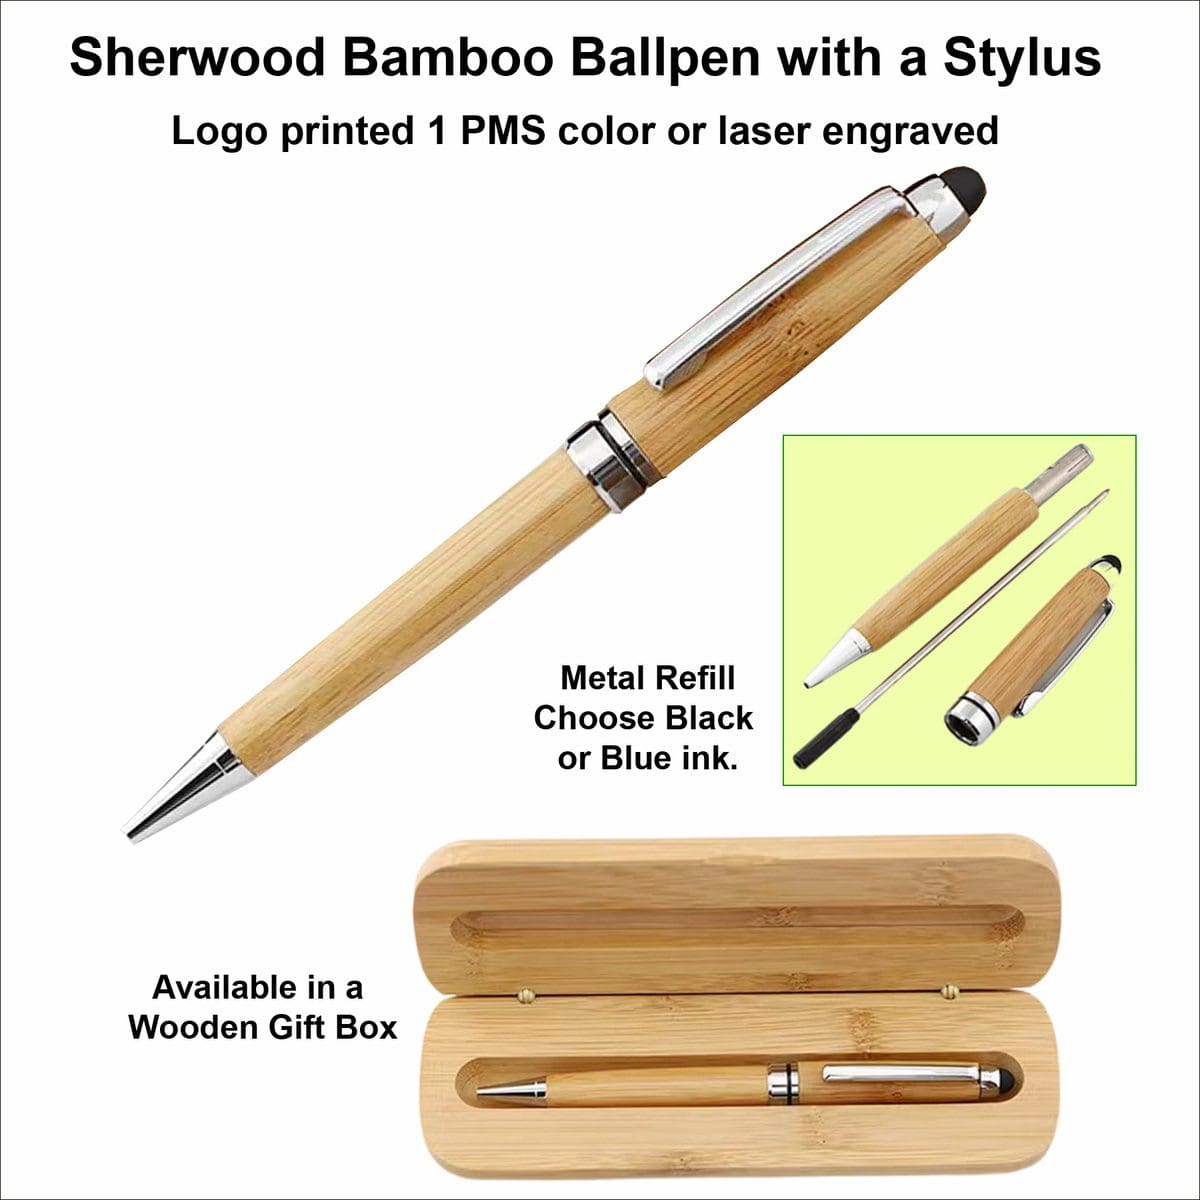 Fusion Marketing Our Top 20 Promotional Pens with Logo Options the Markets Where They Shine Sherwood Bamboo Ball Pen with a Stylus Copy